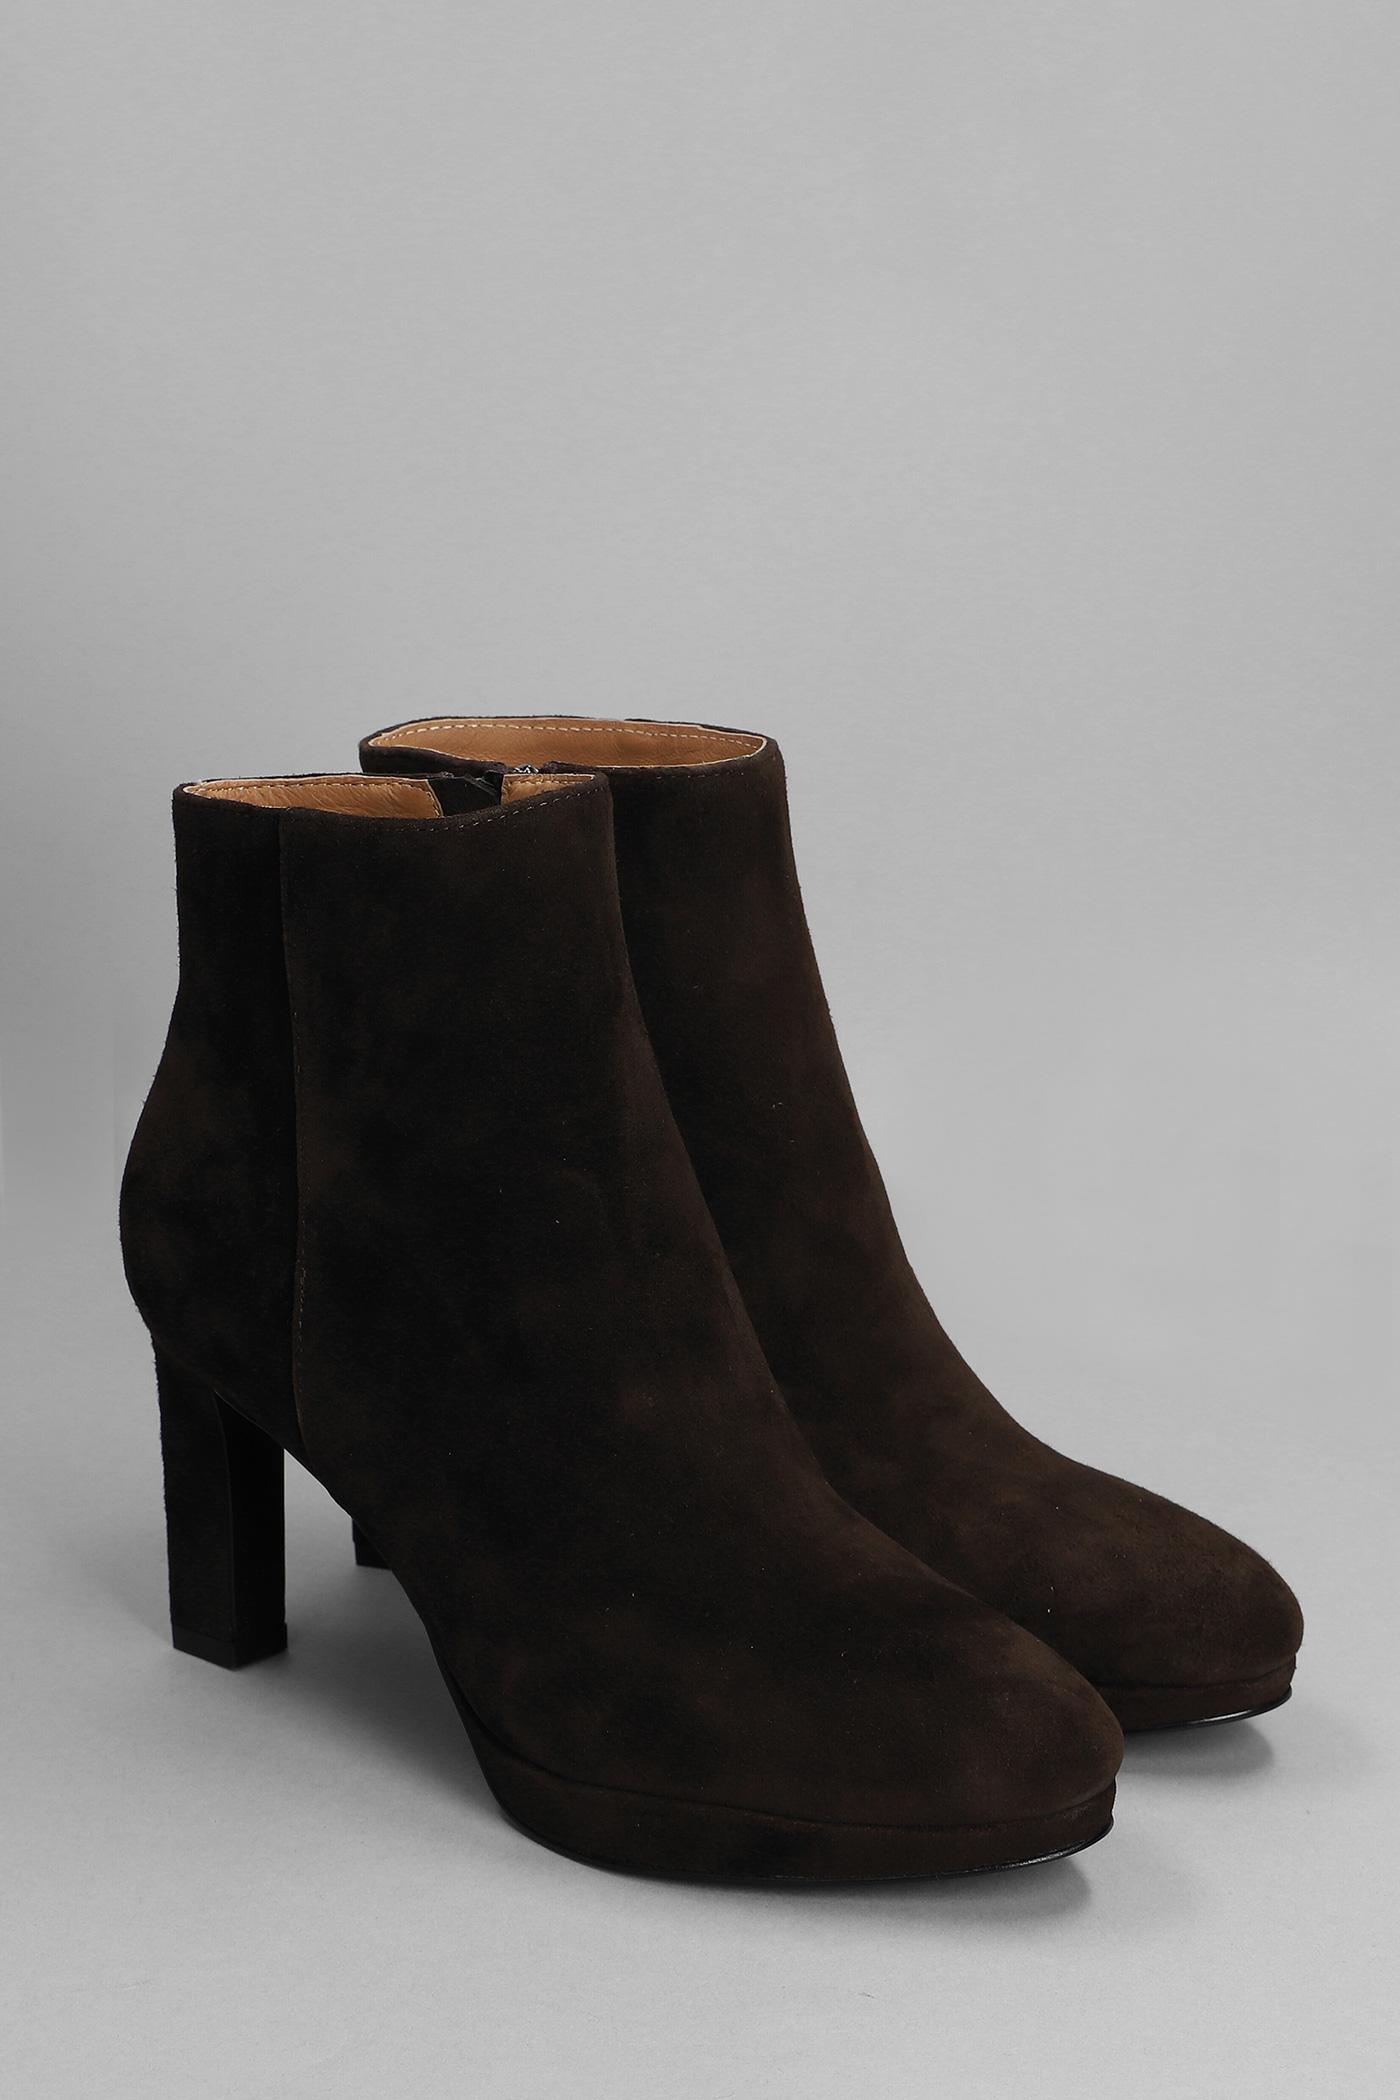 Bibi Lou High Heels Ankle Boots In Brown Suede | Lyst